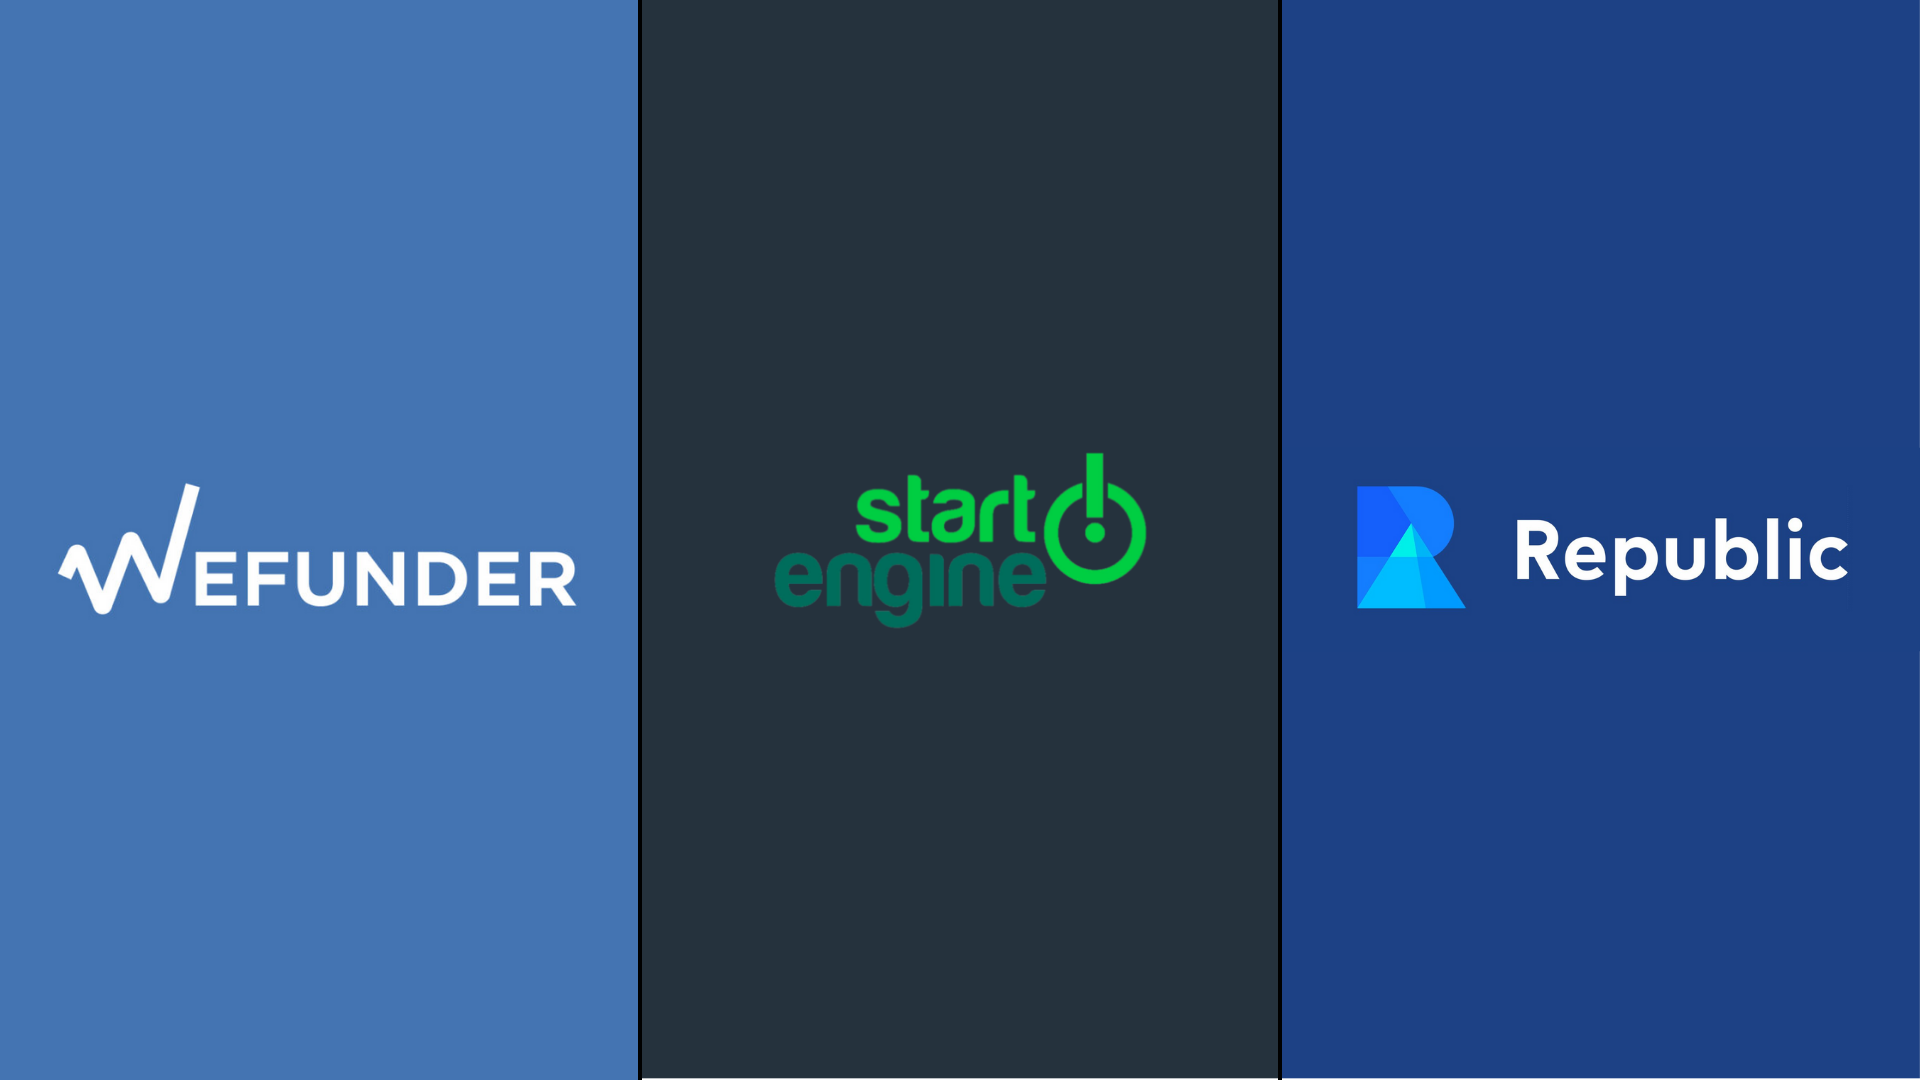 Depicts the Wefunder, StartEngine, and Republic logos staged for a comparison between equity crowdfunding platforms.